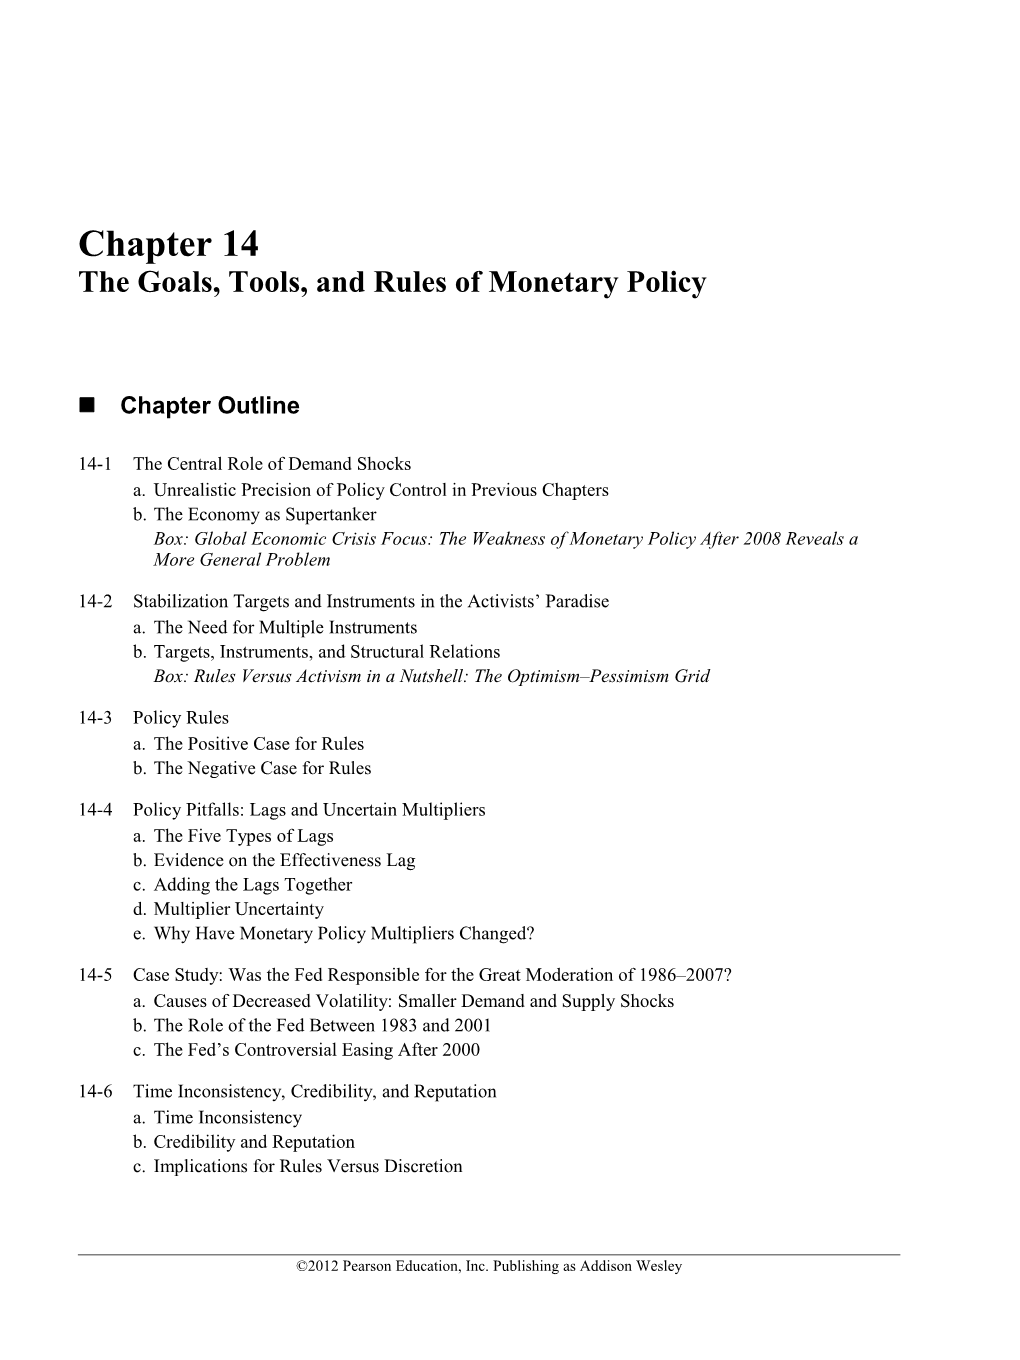 Chapter 14 the Goals, Tools, and Rules of Monetary Policy